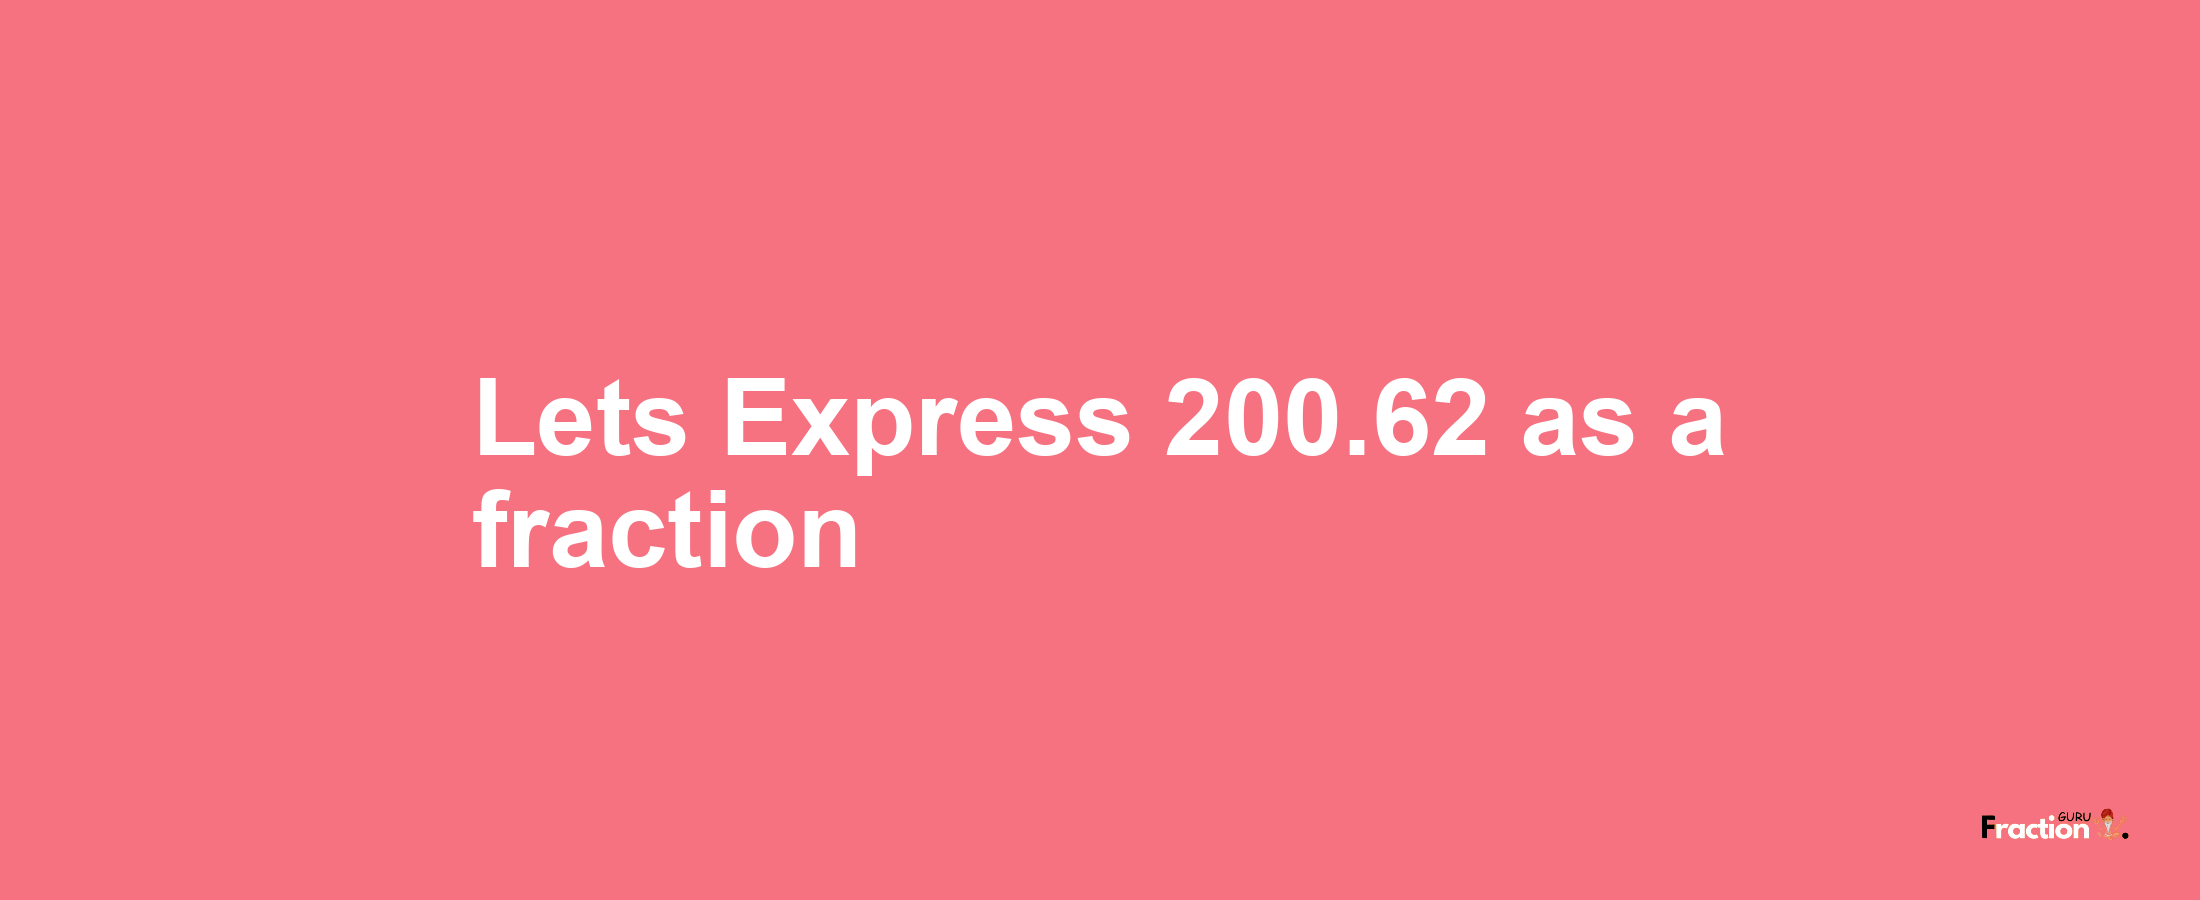 Lets Express 200.62 as afraction